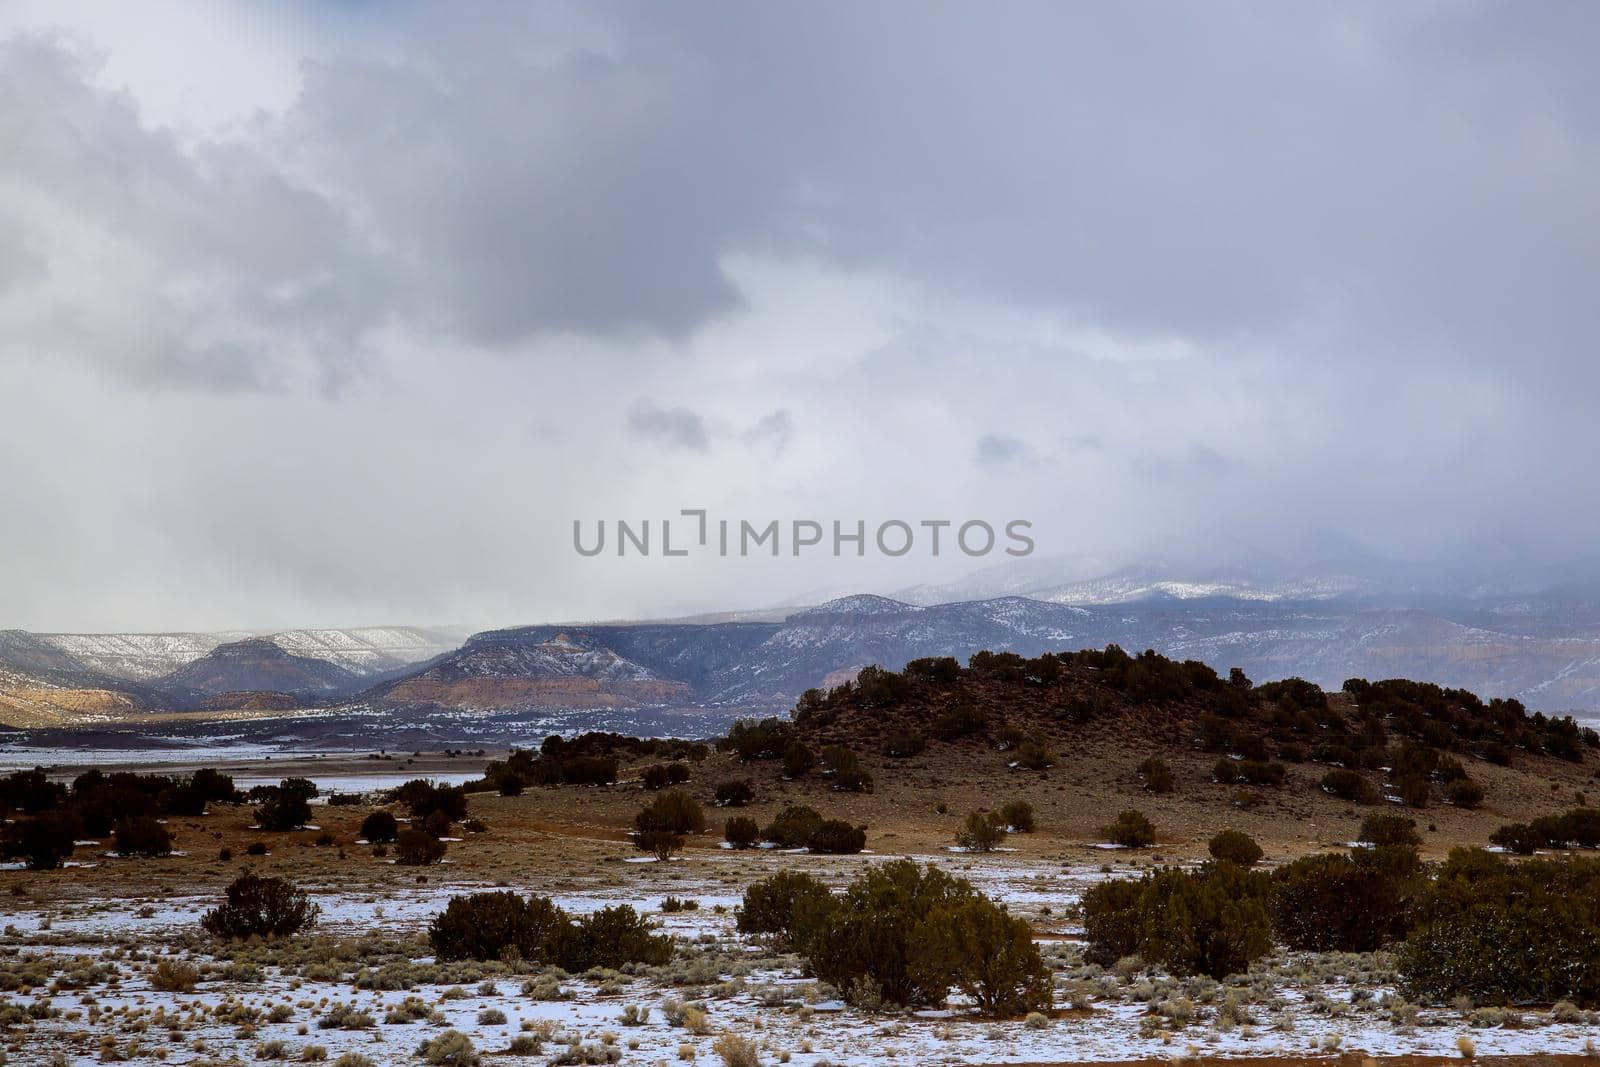 Snow covered of desert mountain along I-40 highway with asphalt road in winter New Mexico